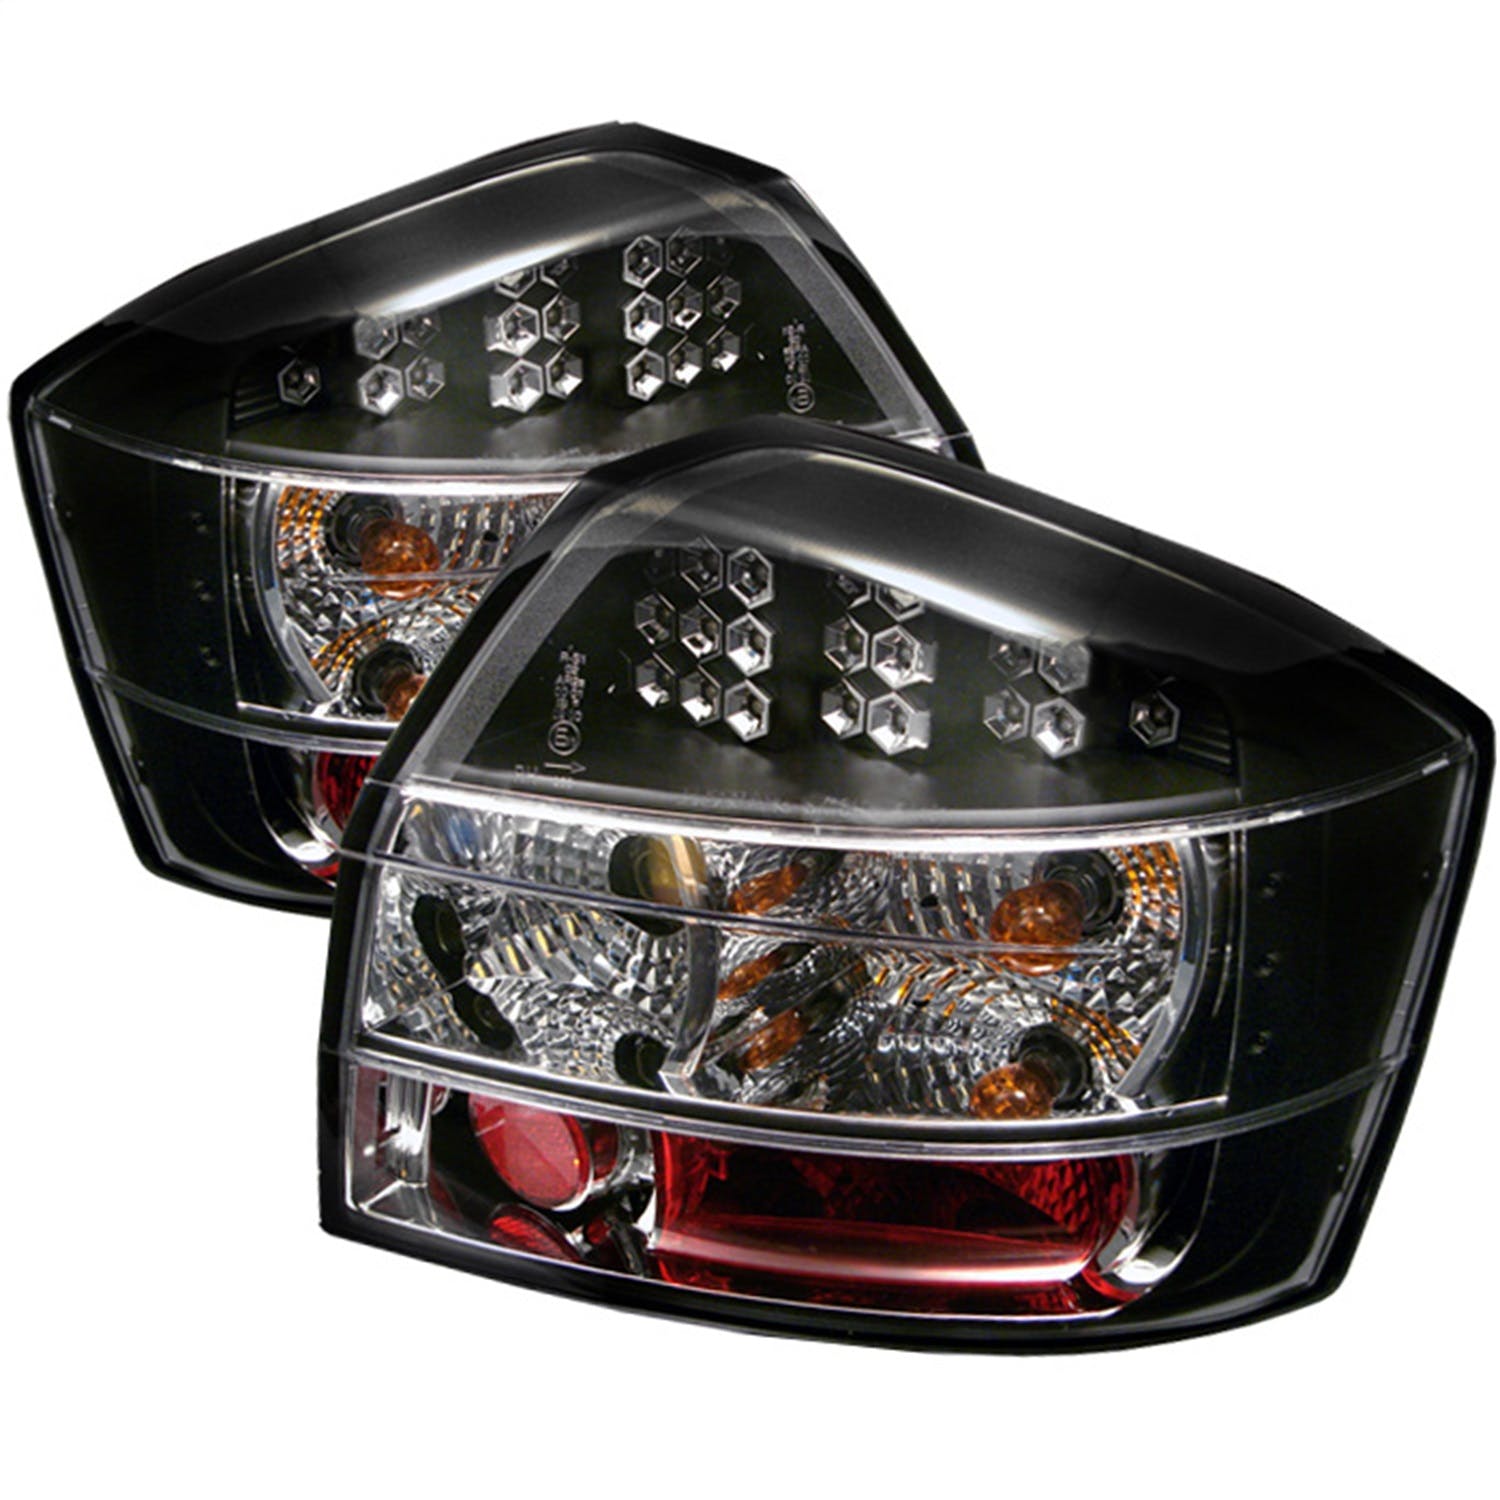 Spyder Auto 5000026 (Spyder) Audi A4 02-05 (Does not fit covertible or wagon models) LED Tail Lights